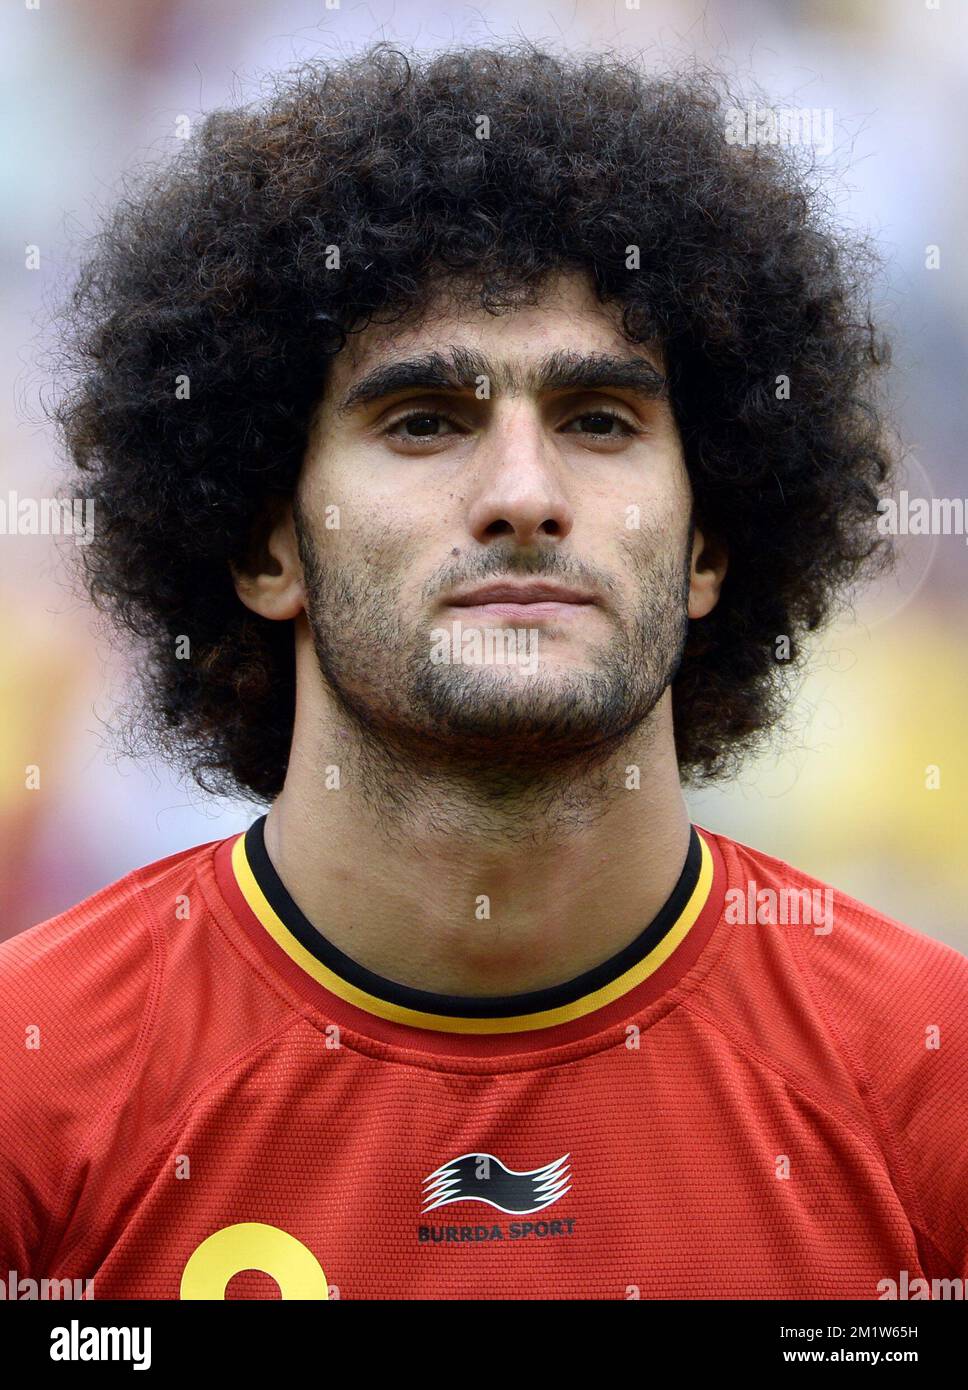 20140622 - RIO DE JANEIRO, BRAZIL: Belgium's Marouane Fellaini pictured at the start of a soccer game between Belgian national team The Red Devils and Russia in Rio de Janeiro, Brazil, the second game in Group H of the first round of the 2014 FIFA World Cup, Sunday 22 June 2014.   BELGA PHOTO DIRK WAEM Stock Photo